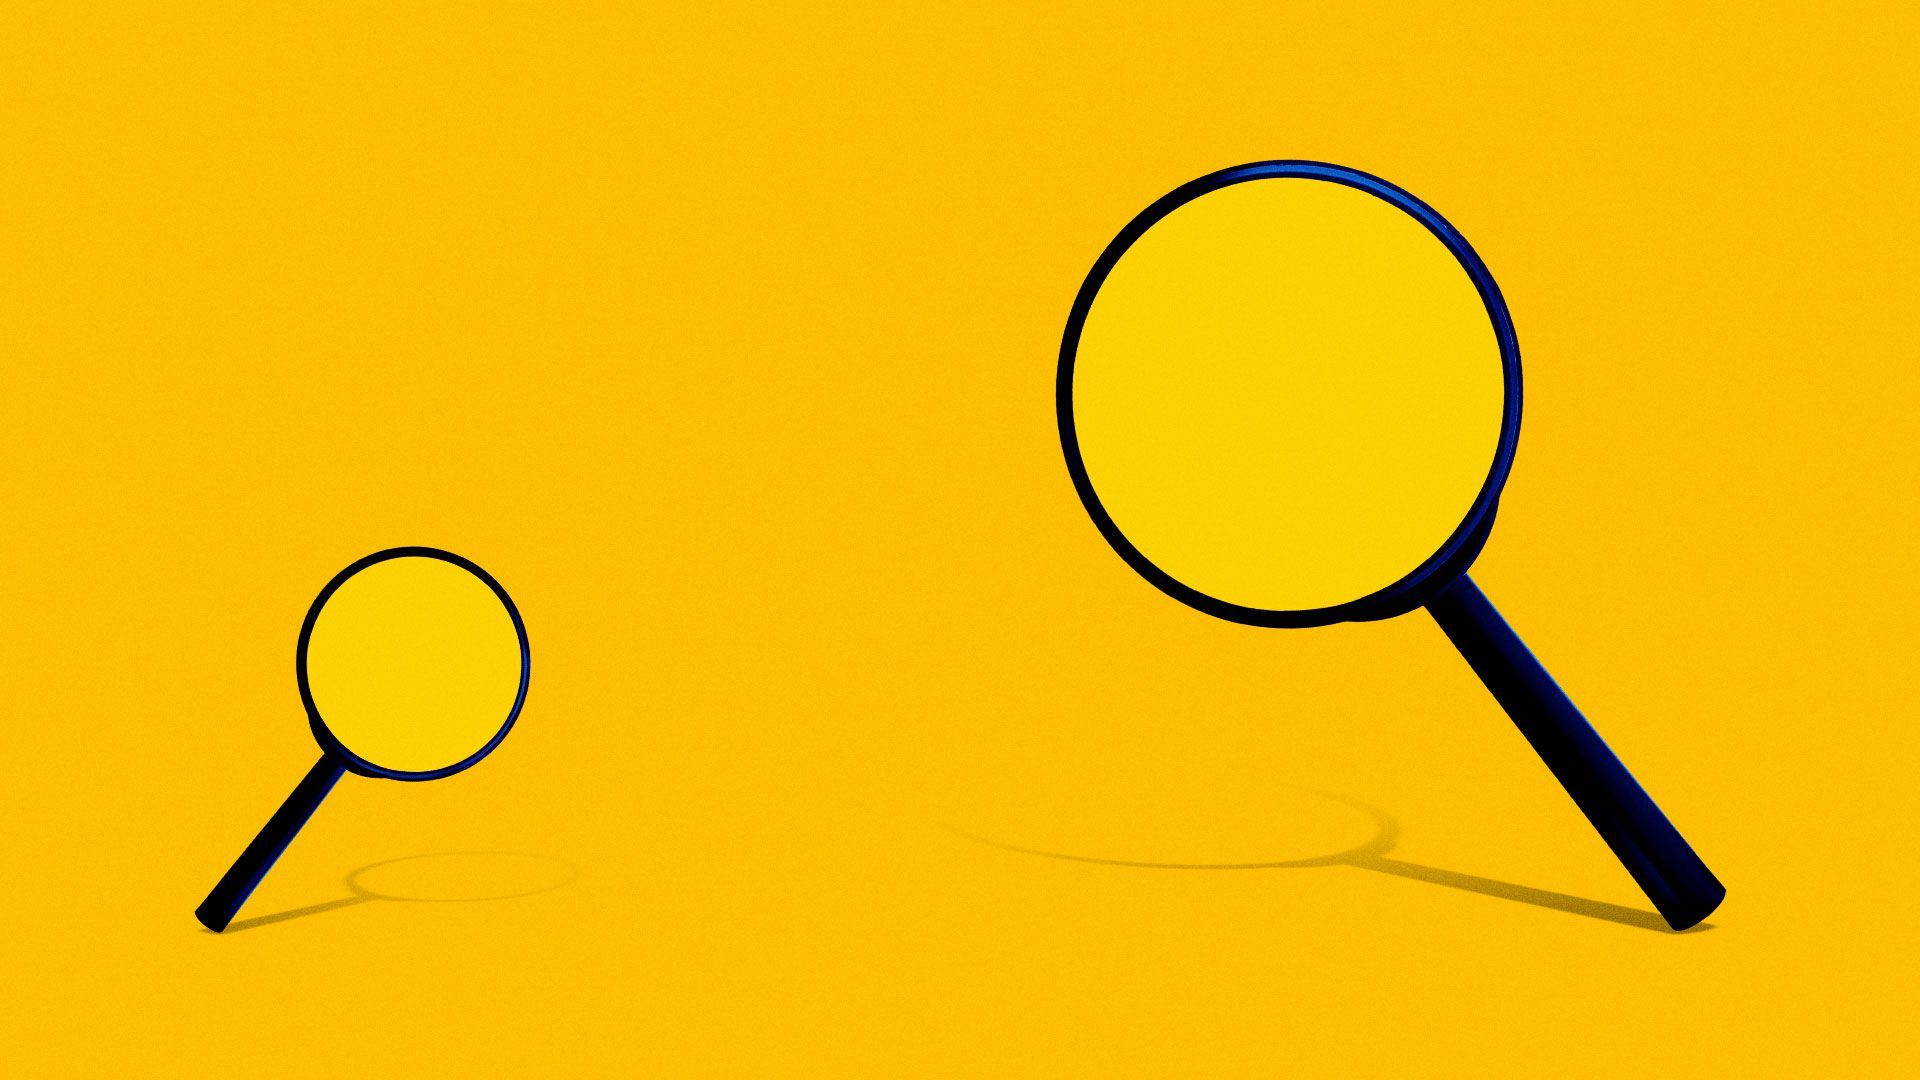 Illustration of a small magnifying glass vs a large magnifying glass